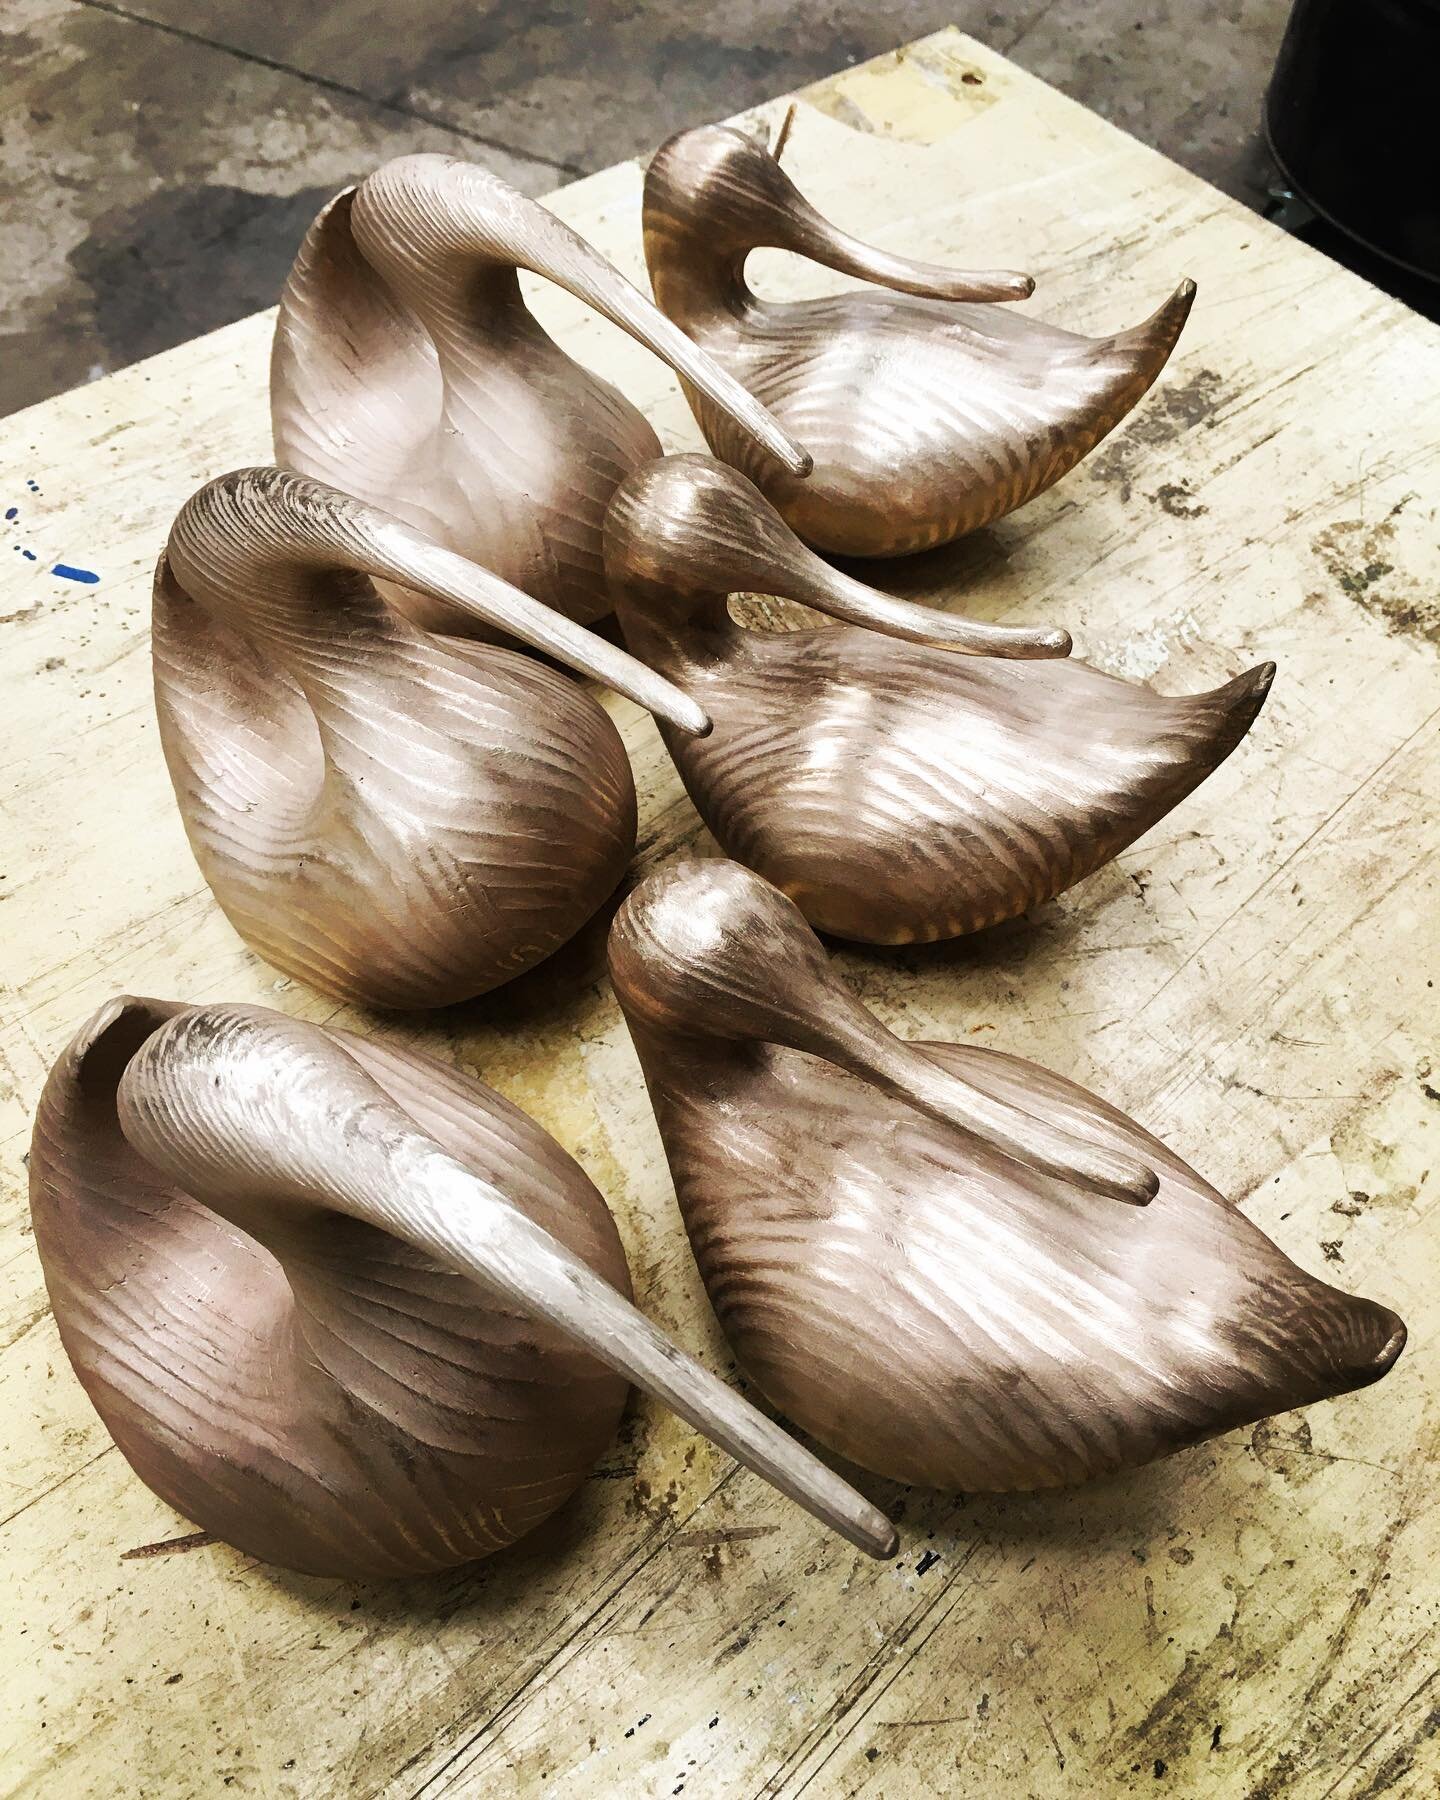 Awaiting patinas, this flock are by sculptor Jon Thompson for whom we regularly cast sculptures. Jon sells his work through the Yellow Bird Gallery based in The Orkney Isles 
.
.
.
.
.
.
.

#bronzefoundry #lostwaxcasting #bronzecast #manchester #pres